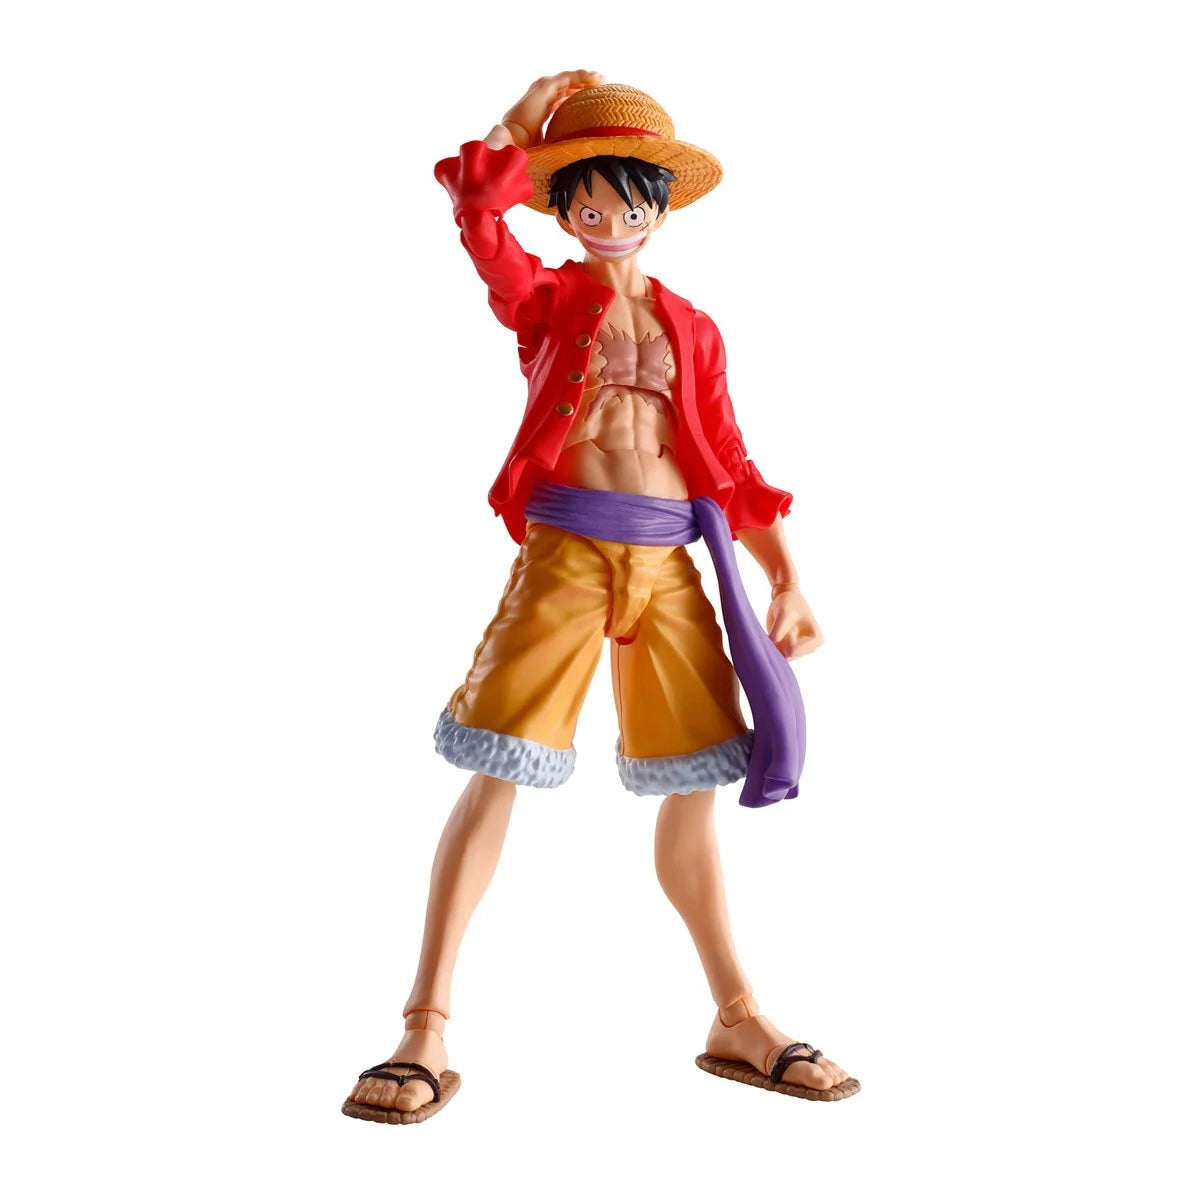 One Piece Signs of the Hight King Sanji 6 Inch Statue Figure Ichiban 